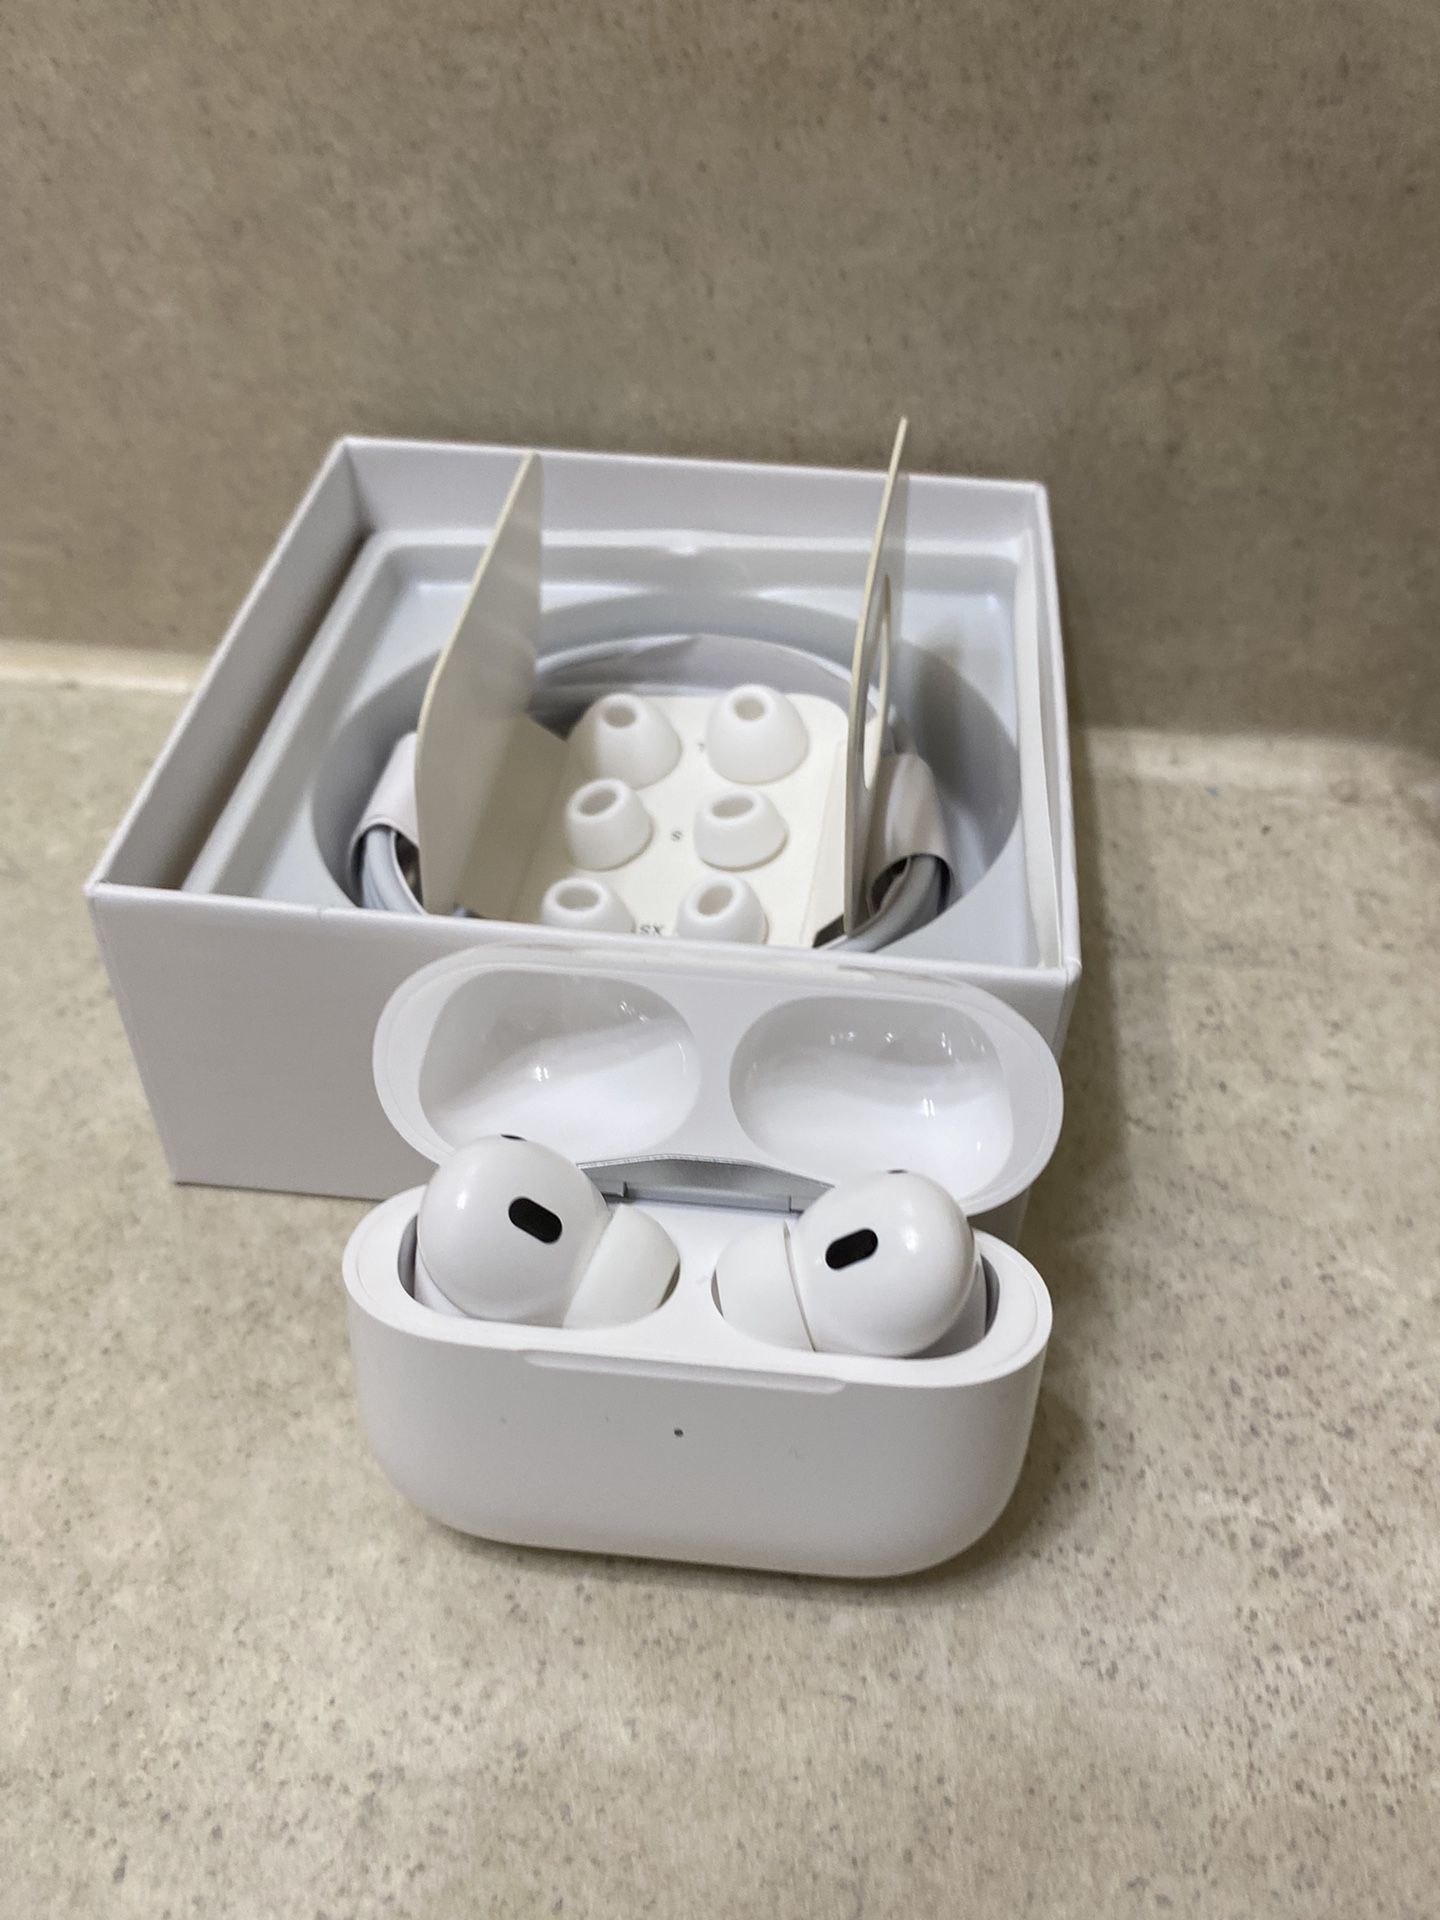 AirPods Pro 2nd Generation Opened For Pictures 